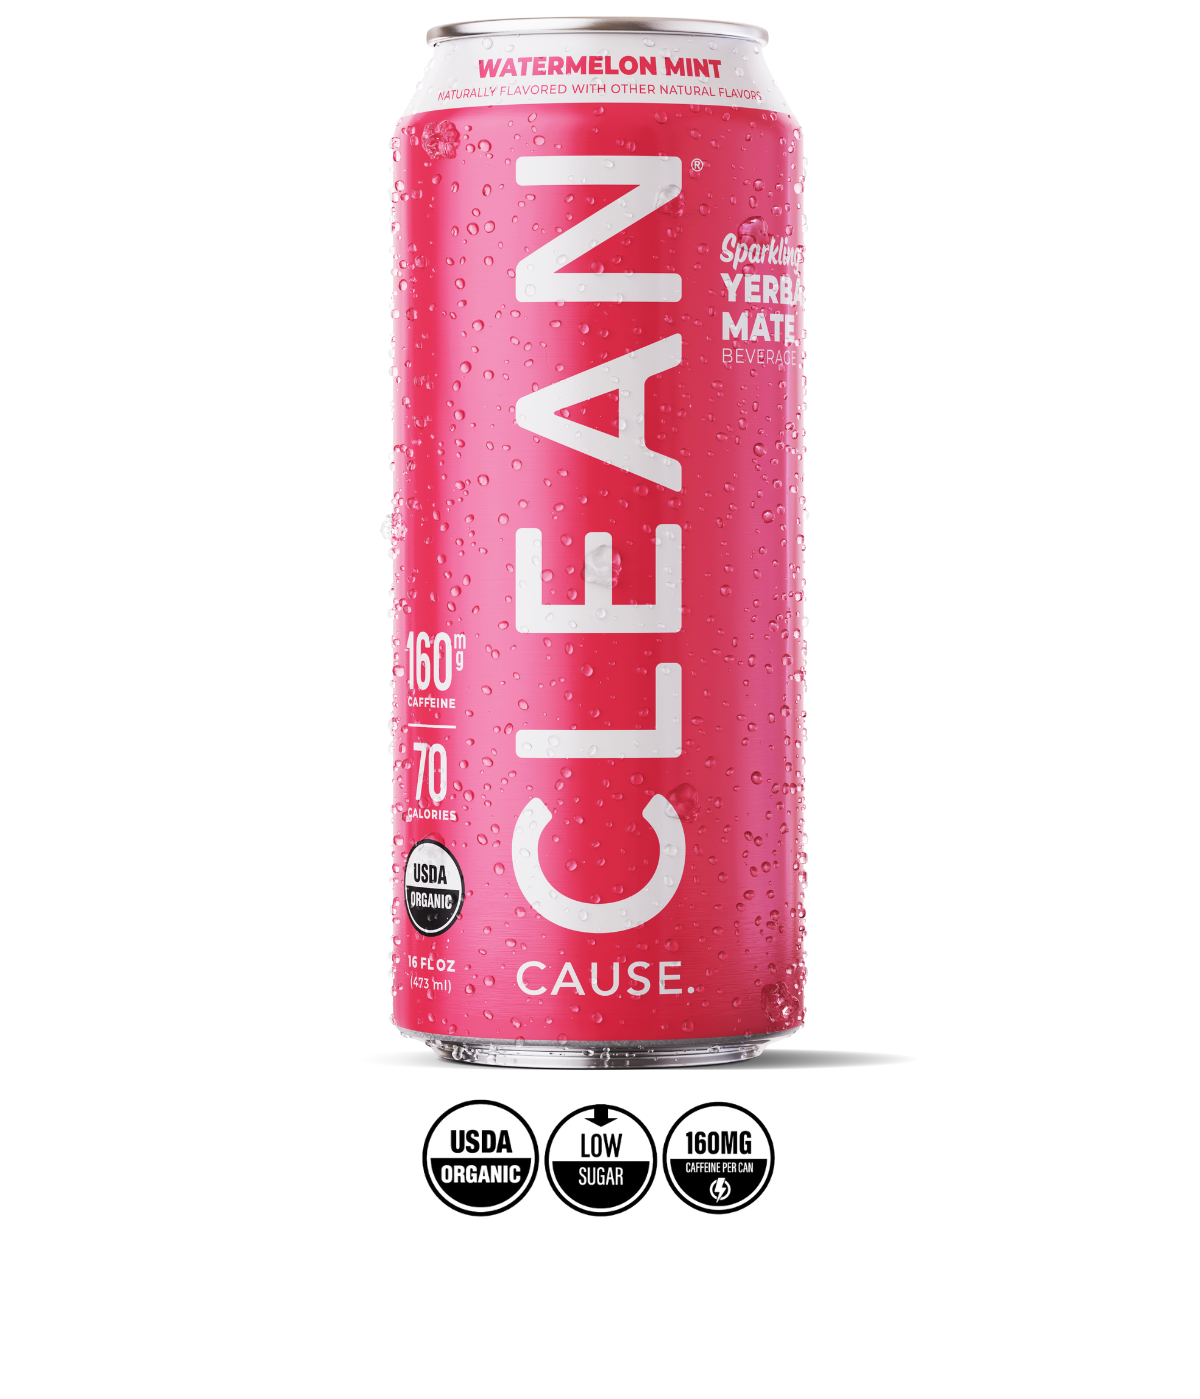 A can of CLEAN Cause Watermelon Mint with the labels USDA Organic, 160mg of caffeine, and low sugar